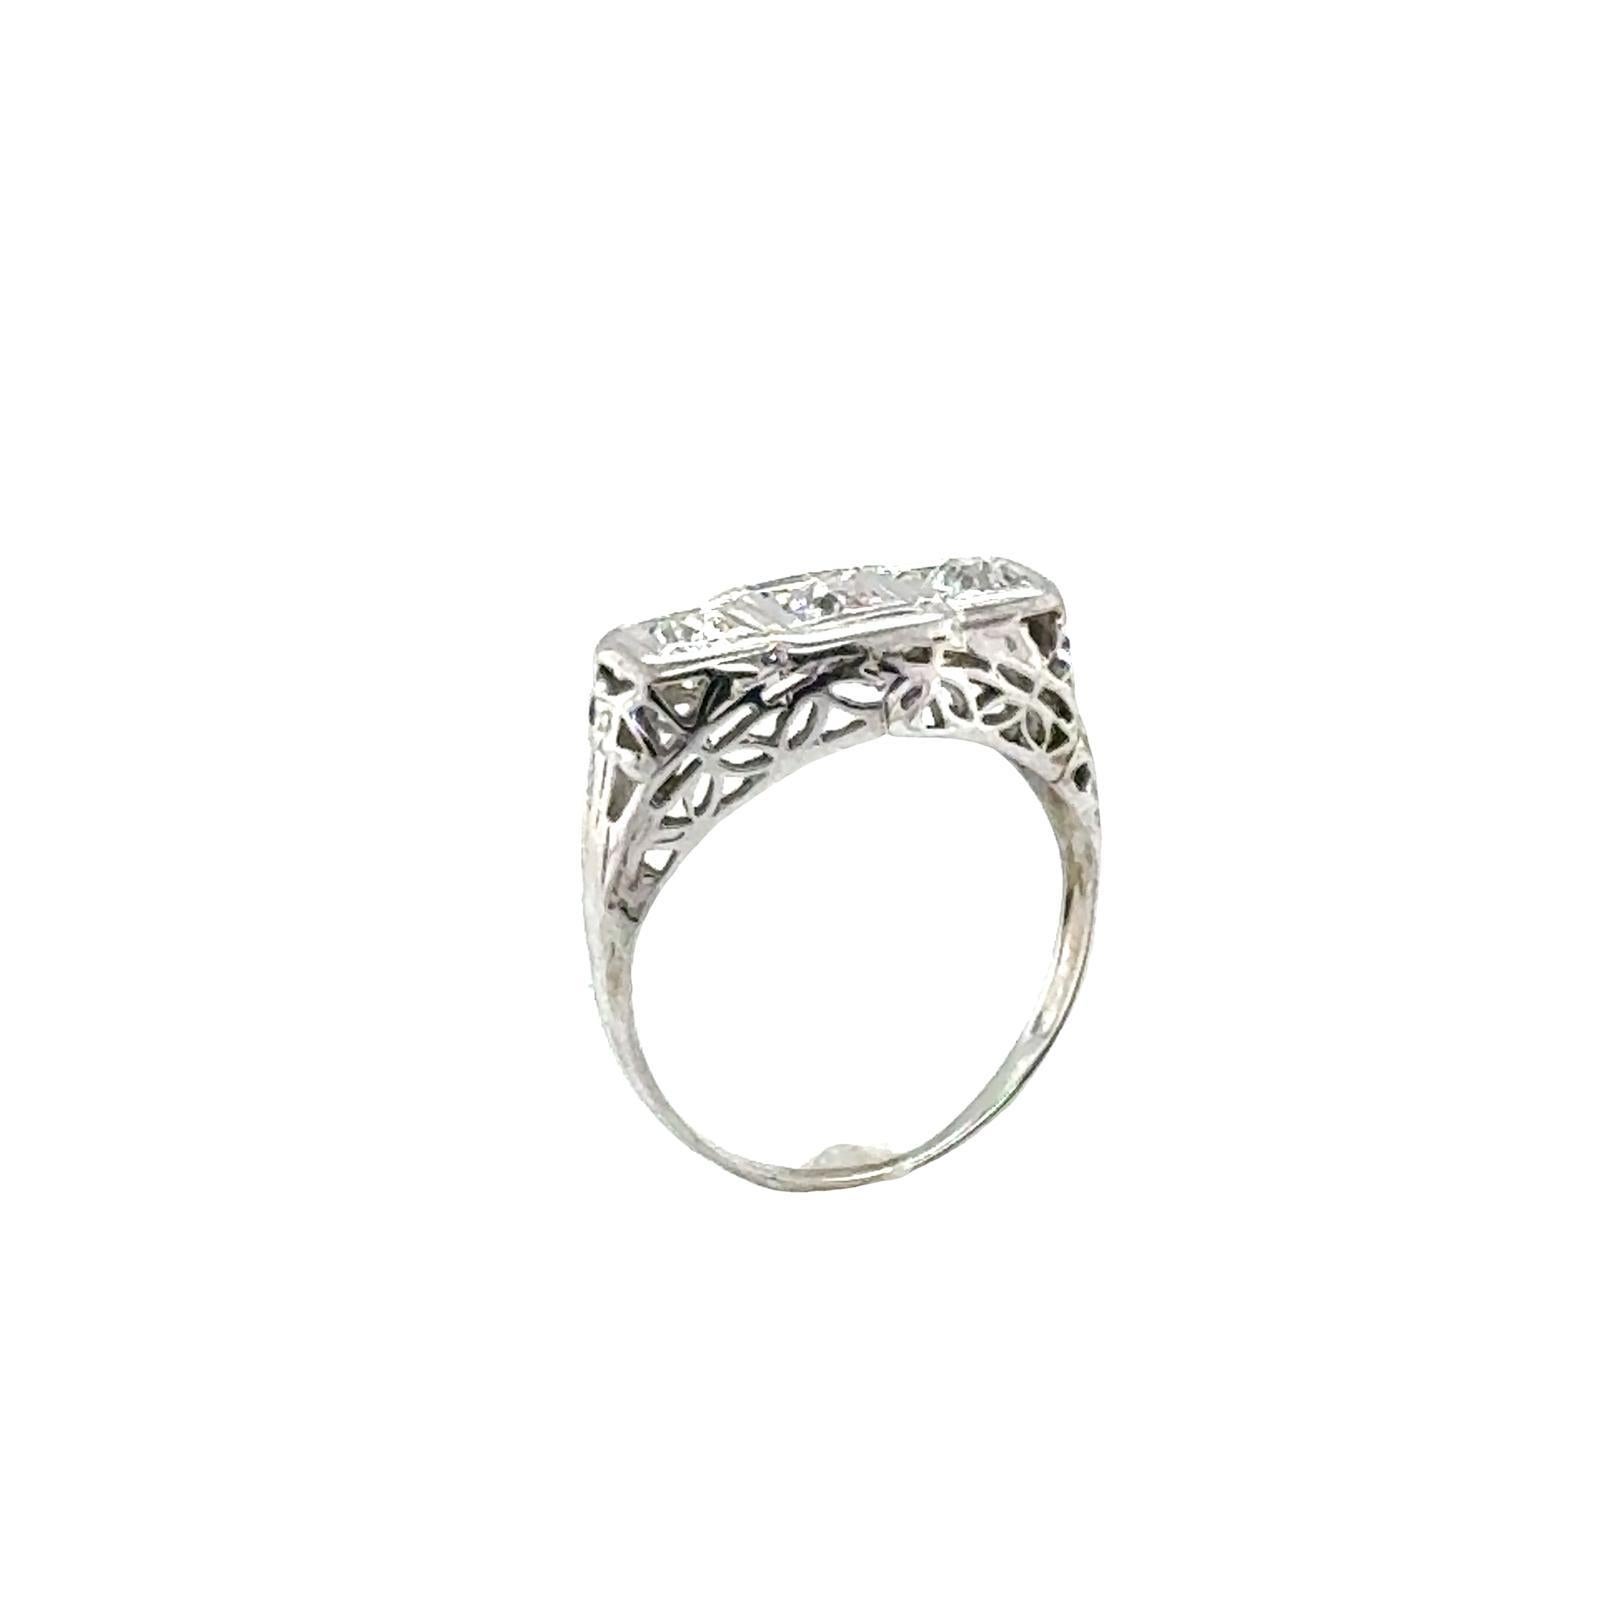 3 Stone Old European Diamond 18 Karat White Gold Filigree Band Ring In Excellent Condition For Sale In Boca Raton, FL